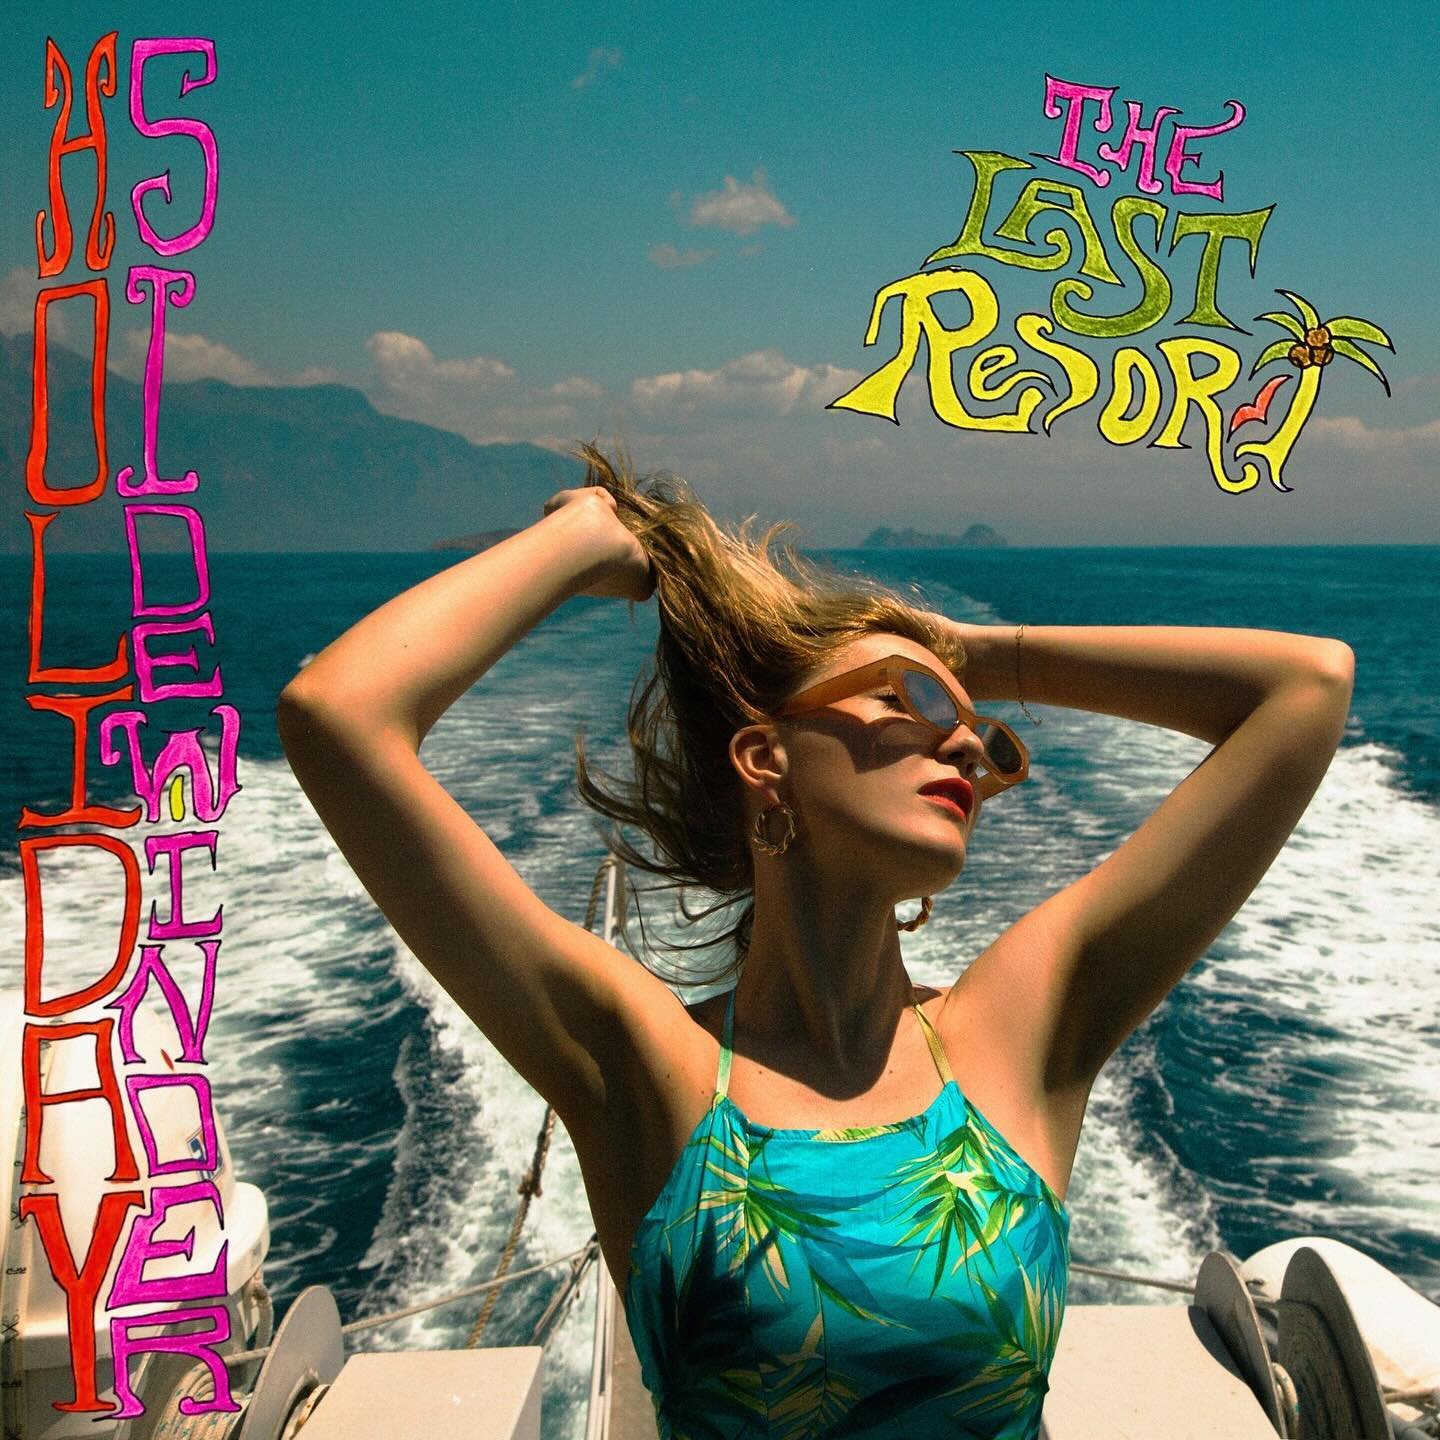 🏝️🏝️🏝️THE LAST RESORT🏝️🏝️🏝️ OUT NOW!!!!
@holidaysidewinder has made a tropical pop masterpiece. Happy release day to this wonderful soul. We shot this album cover on the back of a ferry on our way to capri. So many good moments on this album - 